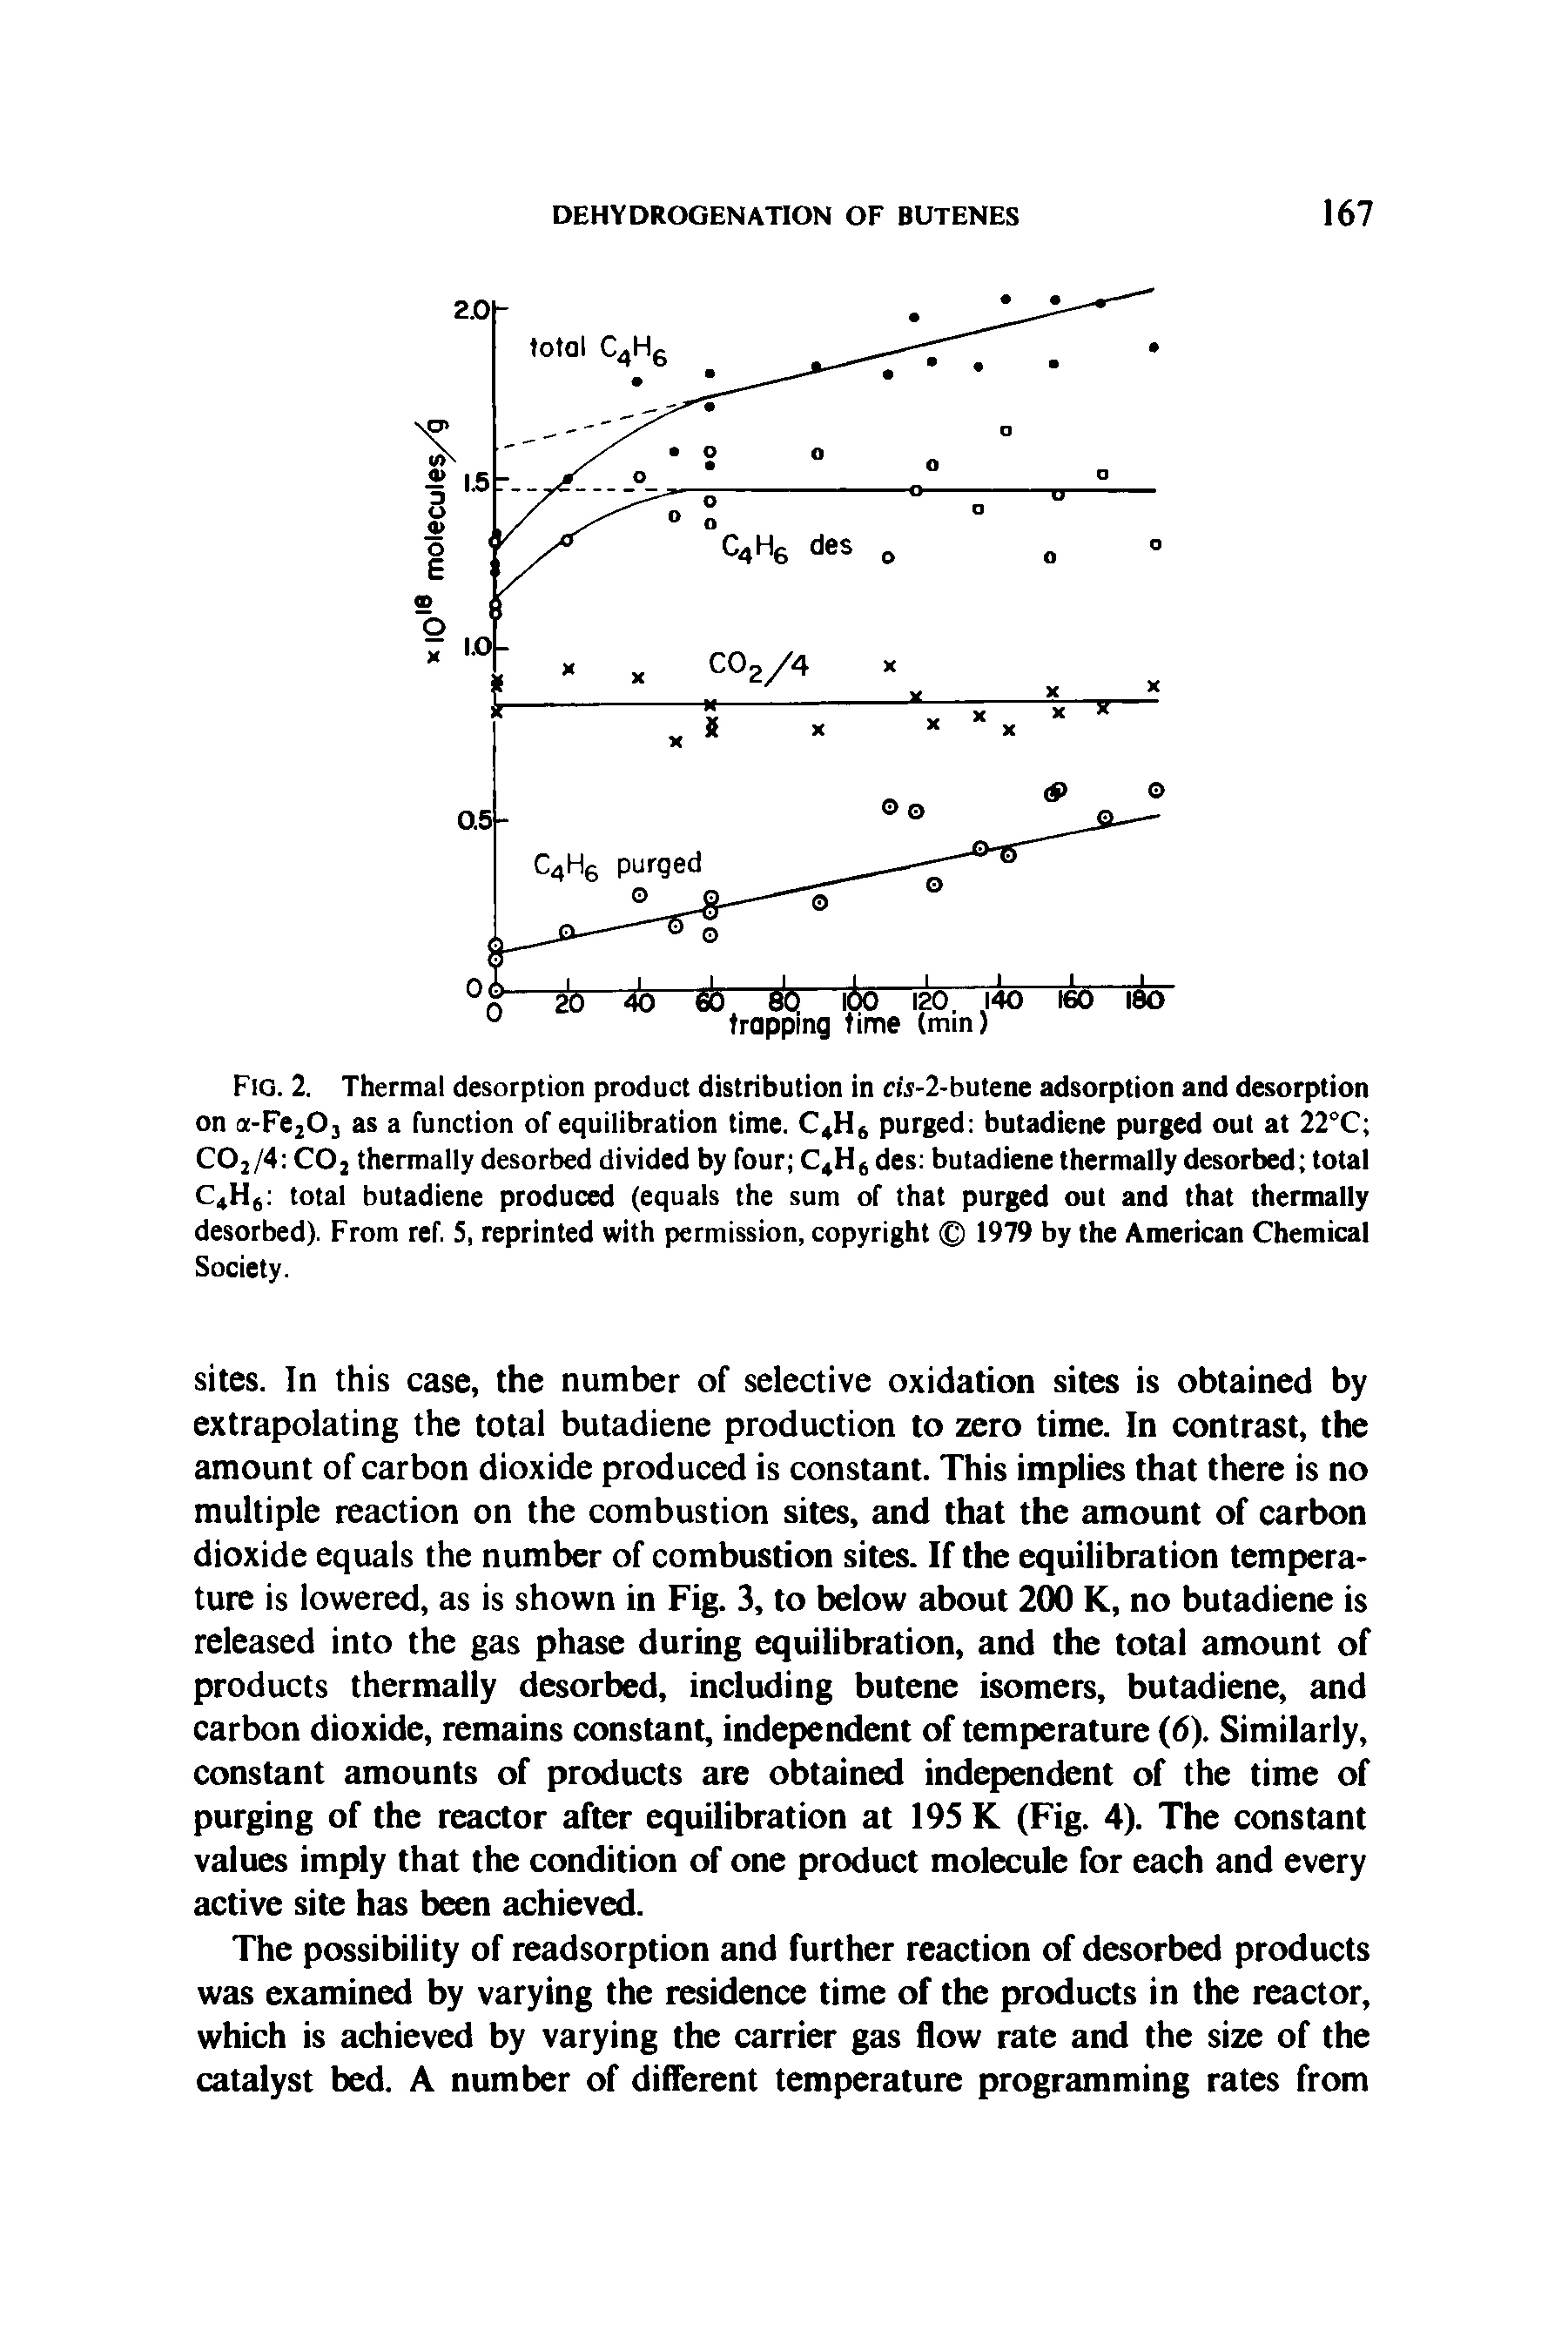 Fig. 2. Thermal desorption product distribution in cis-2-butene adsorption and desorption on a-Fe203 as a function of equilibration time. C4H6 purged butadiene purged out at 22°C C02 /4 C02 thermally desorbed divided by four C4H6 des butadiene thermally desorbed total C4H6 total butadiene produced (equals the sum of that purged out and that thermally desorbed). From ref. 5, reprinted with permission, copyright 1979 by the American Chemical Society.